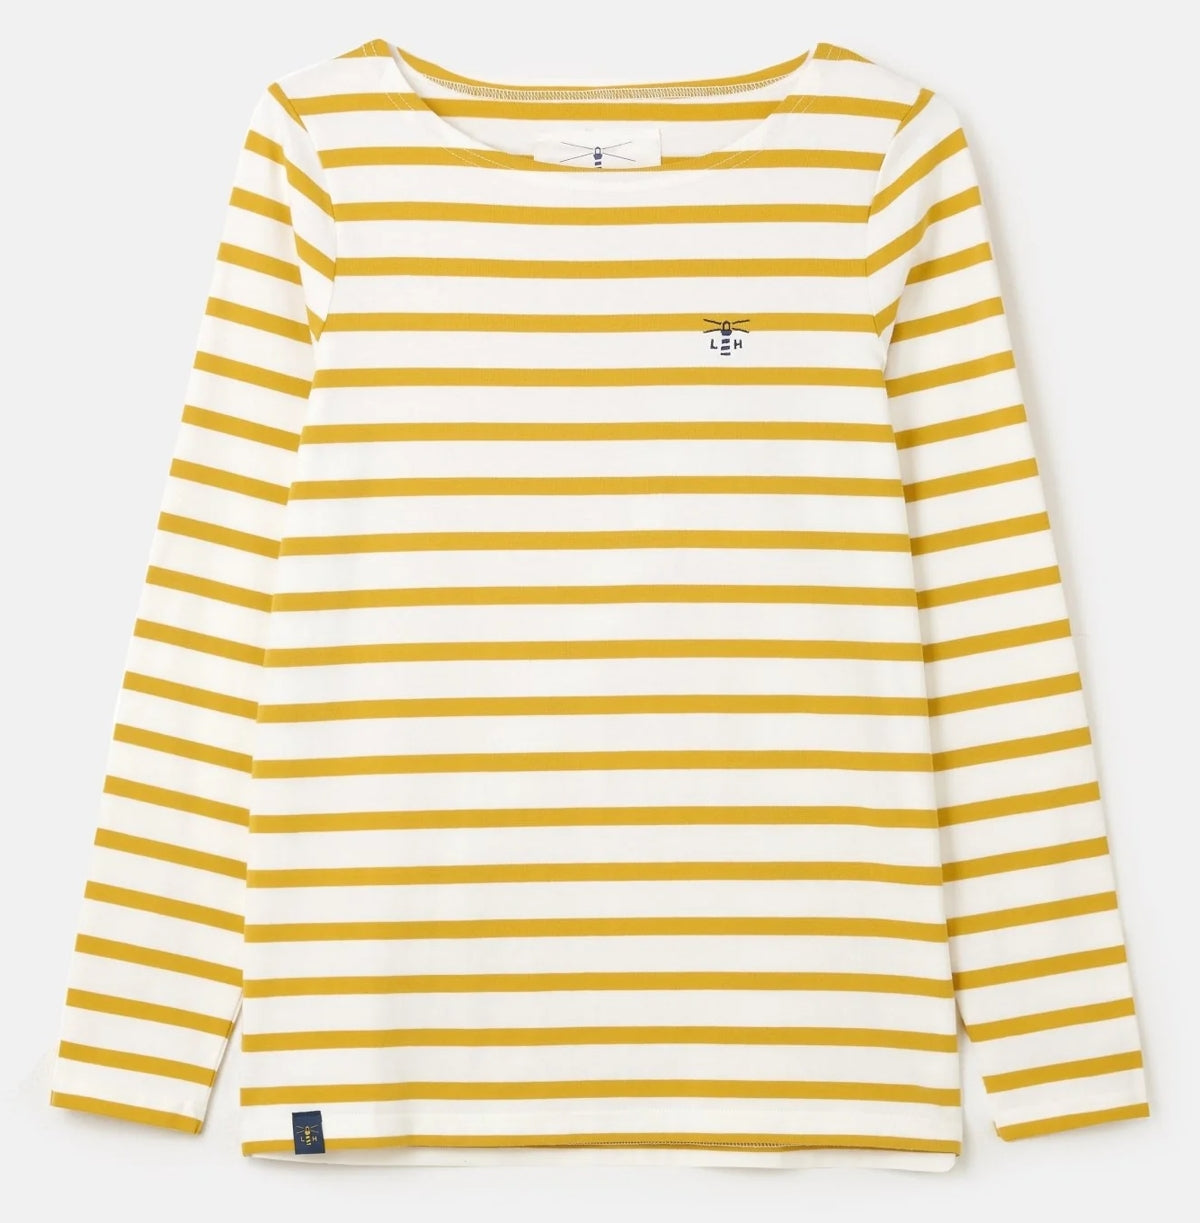 White and Sunrise Yellow stripey Causeway women's top from Lighthouse.